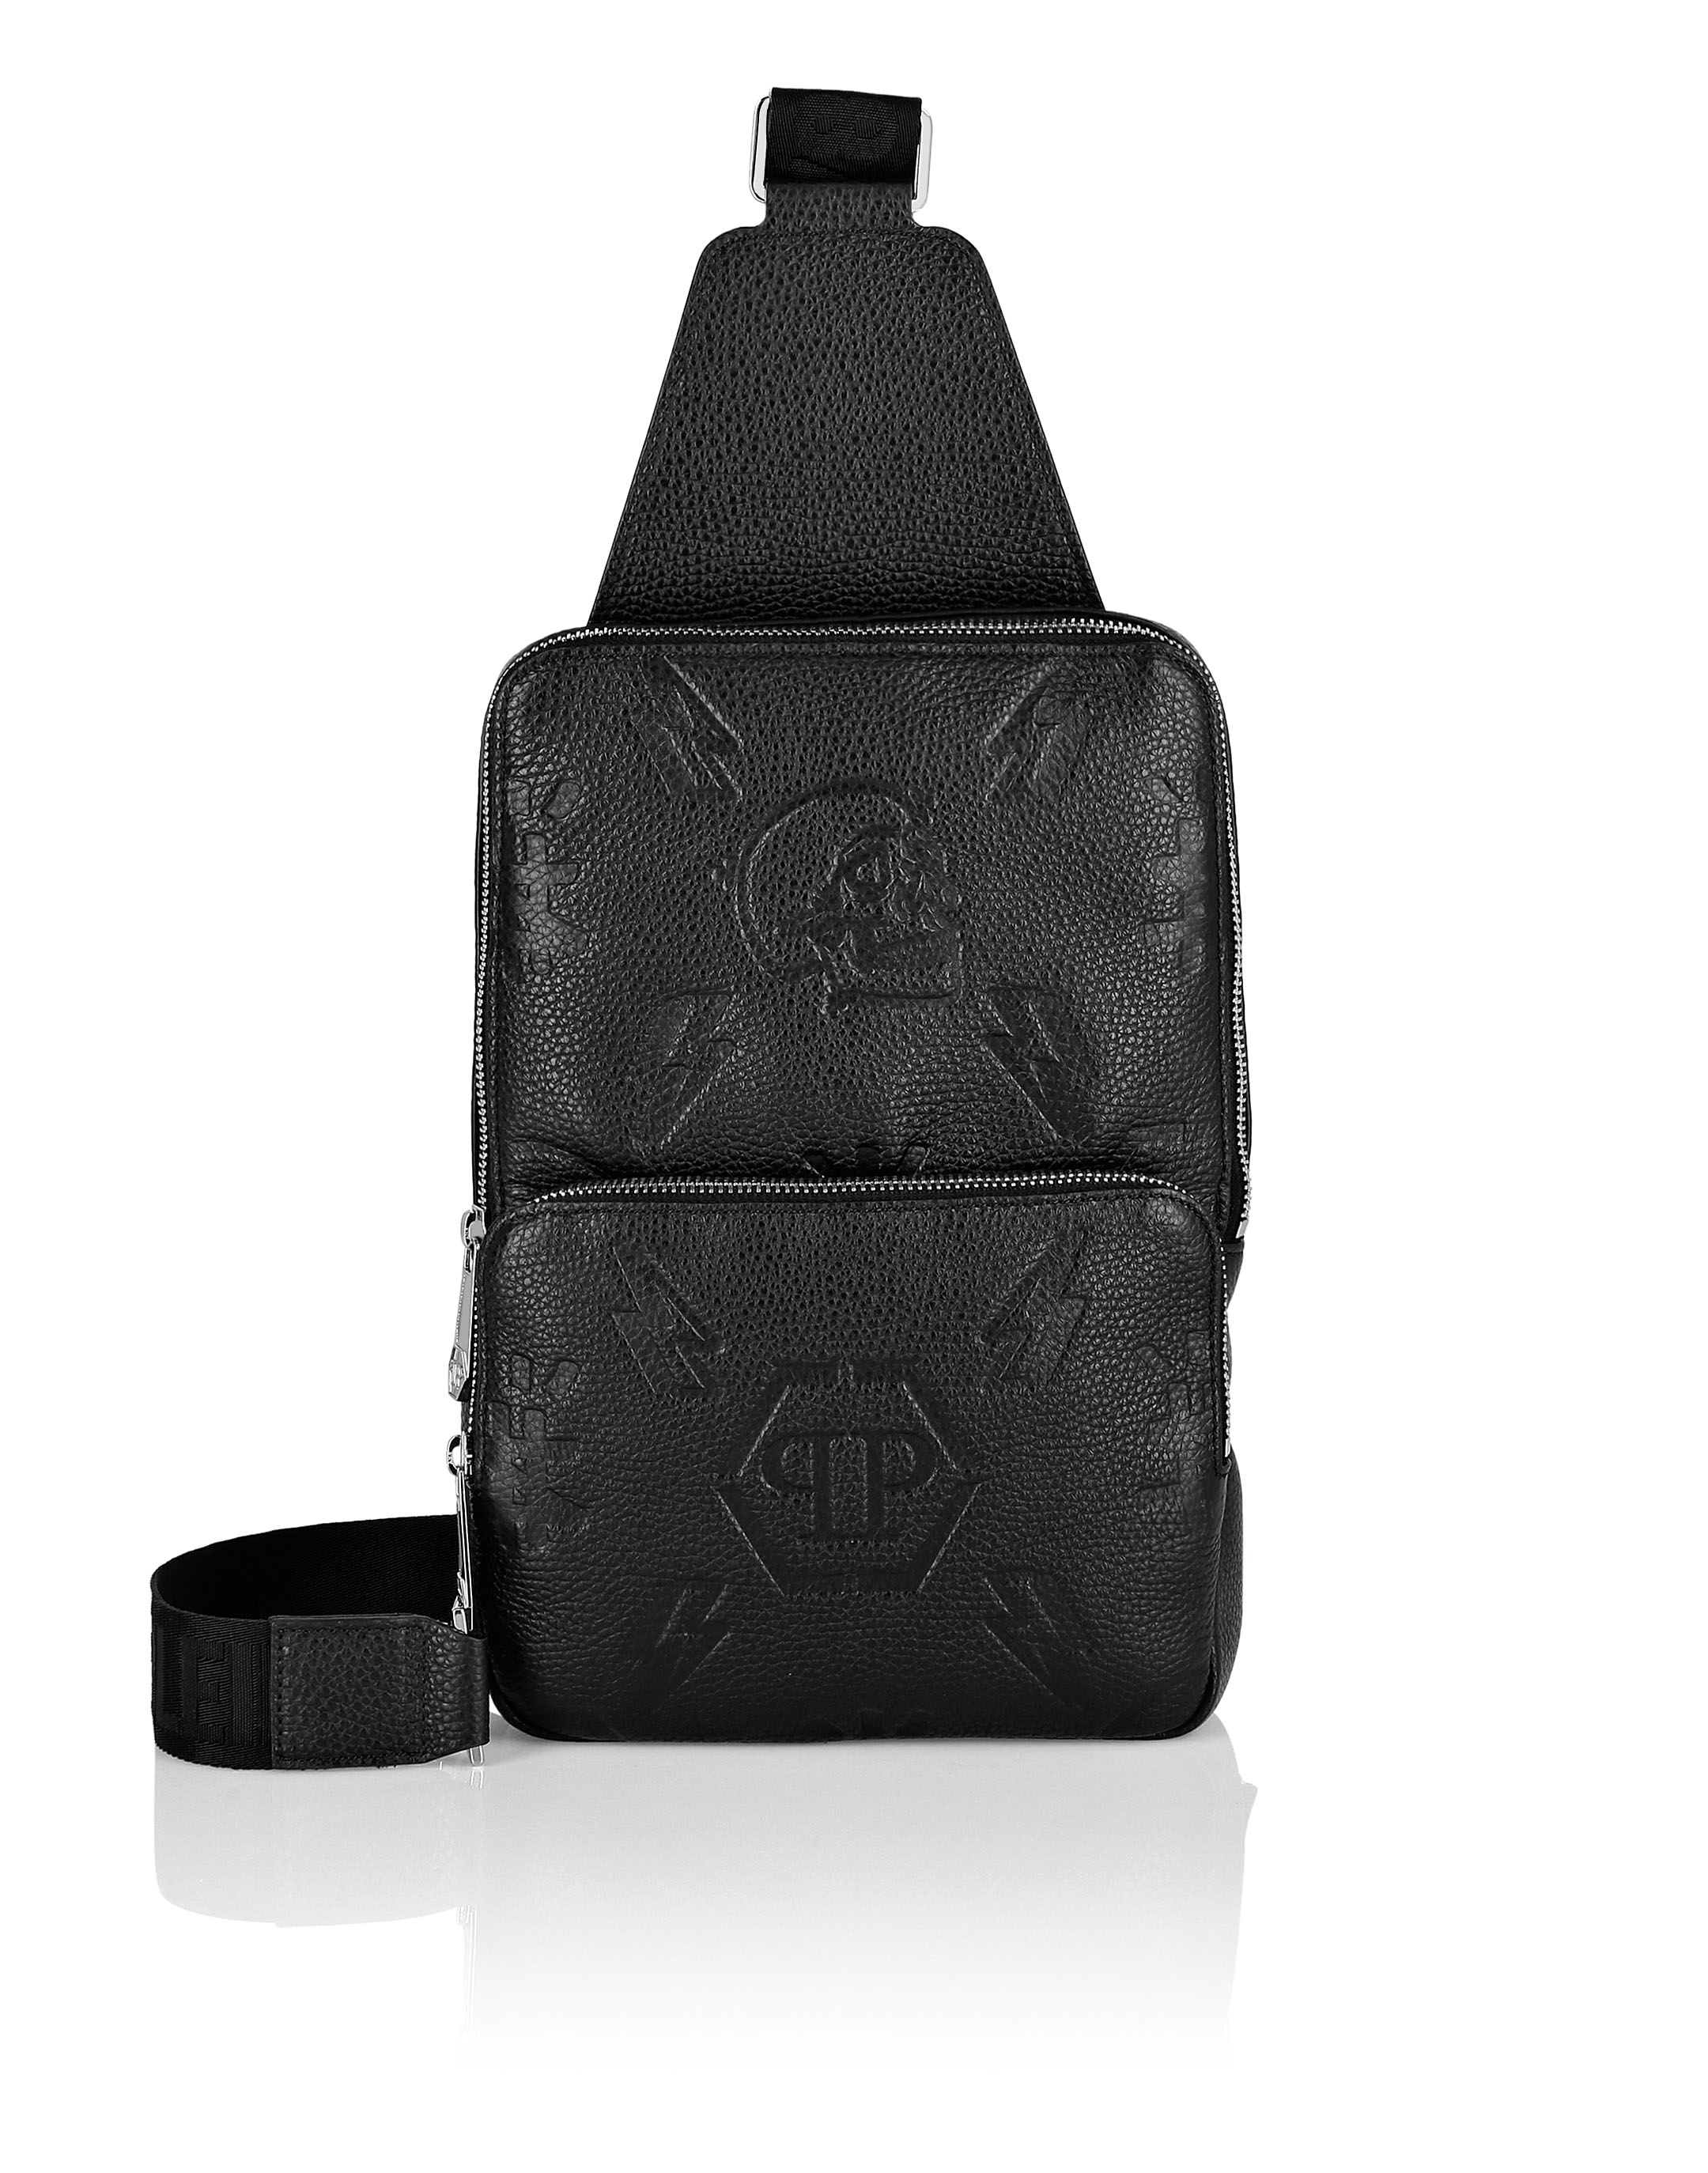 Mcraft 20mm Black Leather Cross Body Strap, Compatible with Black Noe Noe and Monogram Bags with Black Leather Trim Like Odeon Boulogne